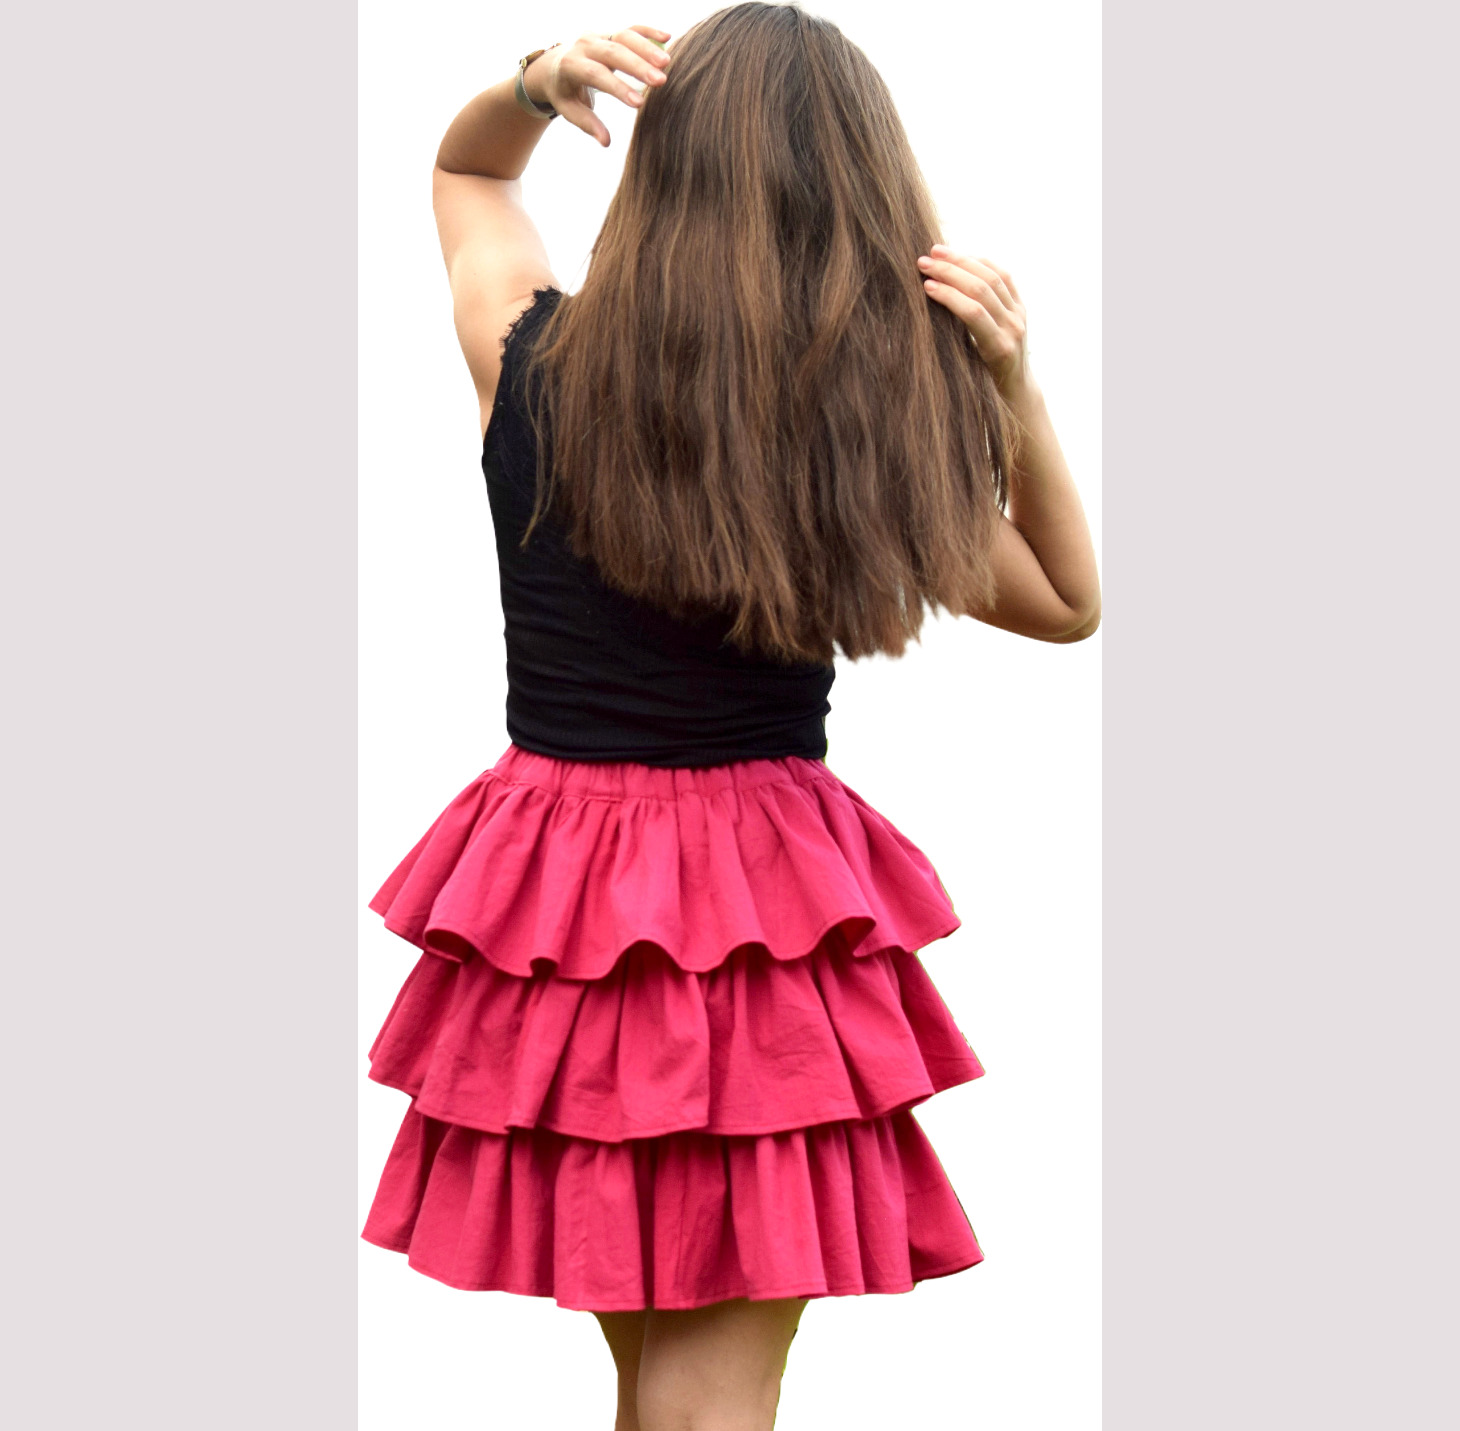 UNACOO 2 Packs 100% Cotton Tiered Ruffle Skirt with Elastic Waistband for Girls 